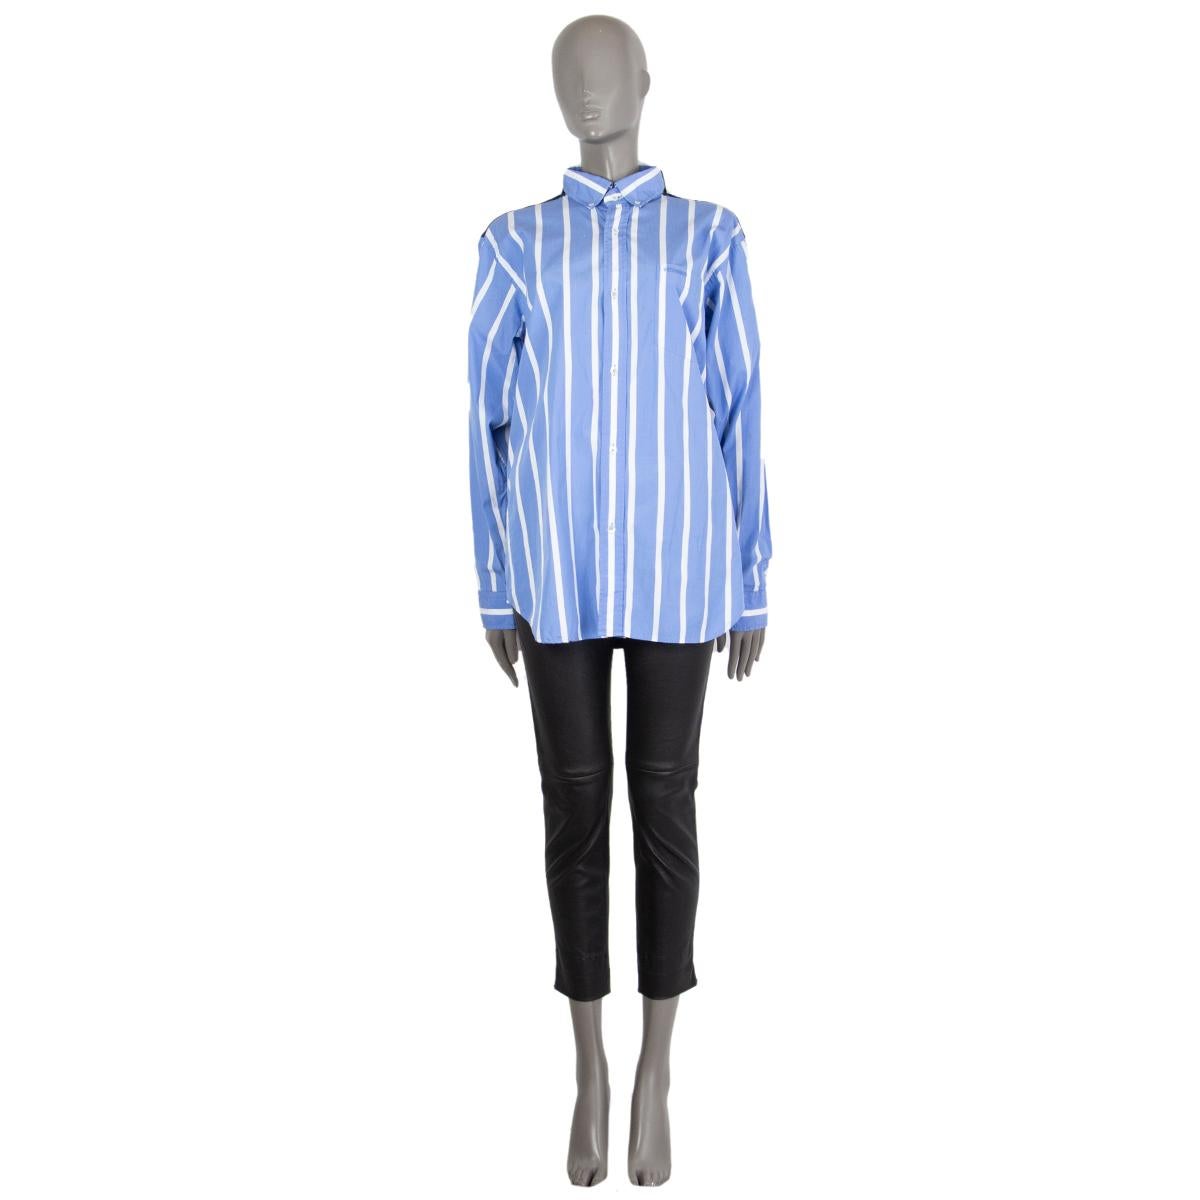 100% authentic Vetements Pour Femme double-sided shirt in midnight blue, white and periwinkle cotton (100%) with one side striped and the other one plain, two attached collars, oversized fit, long sleeves with buttoned cuffs, both sides with a chest